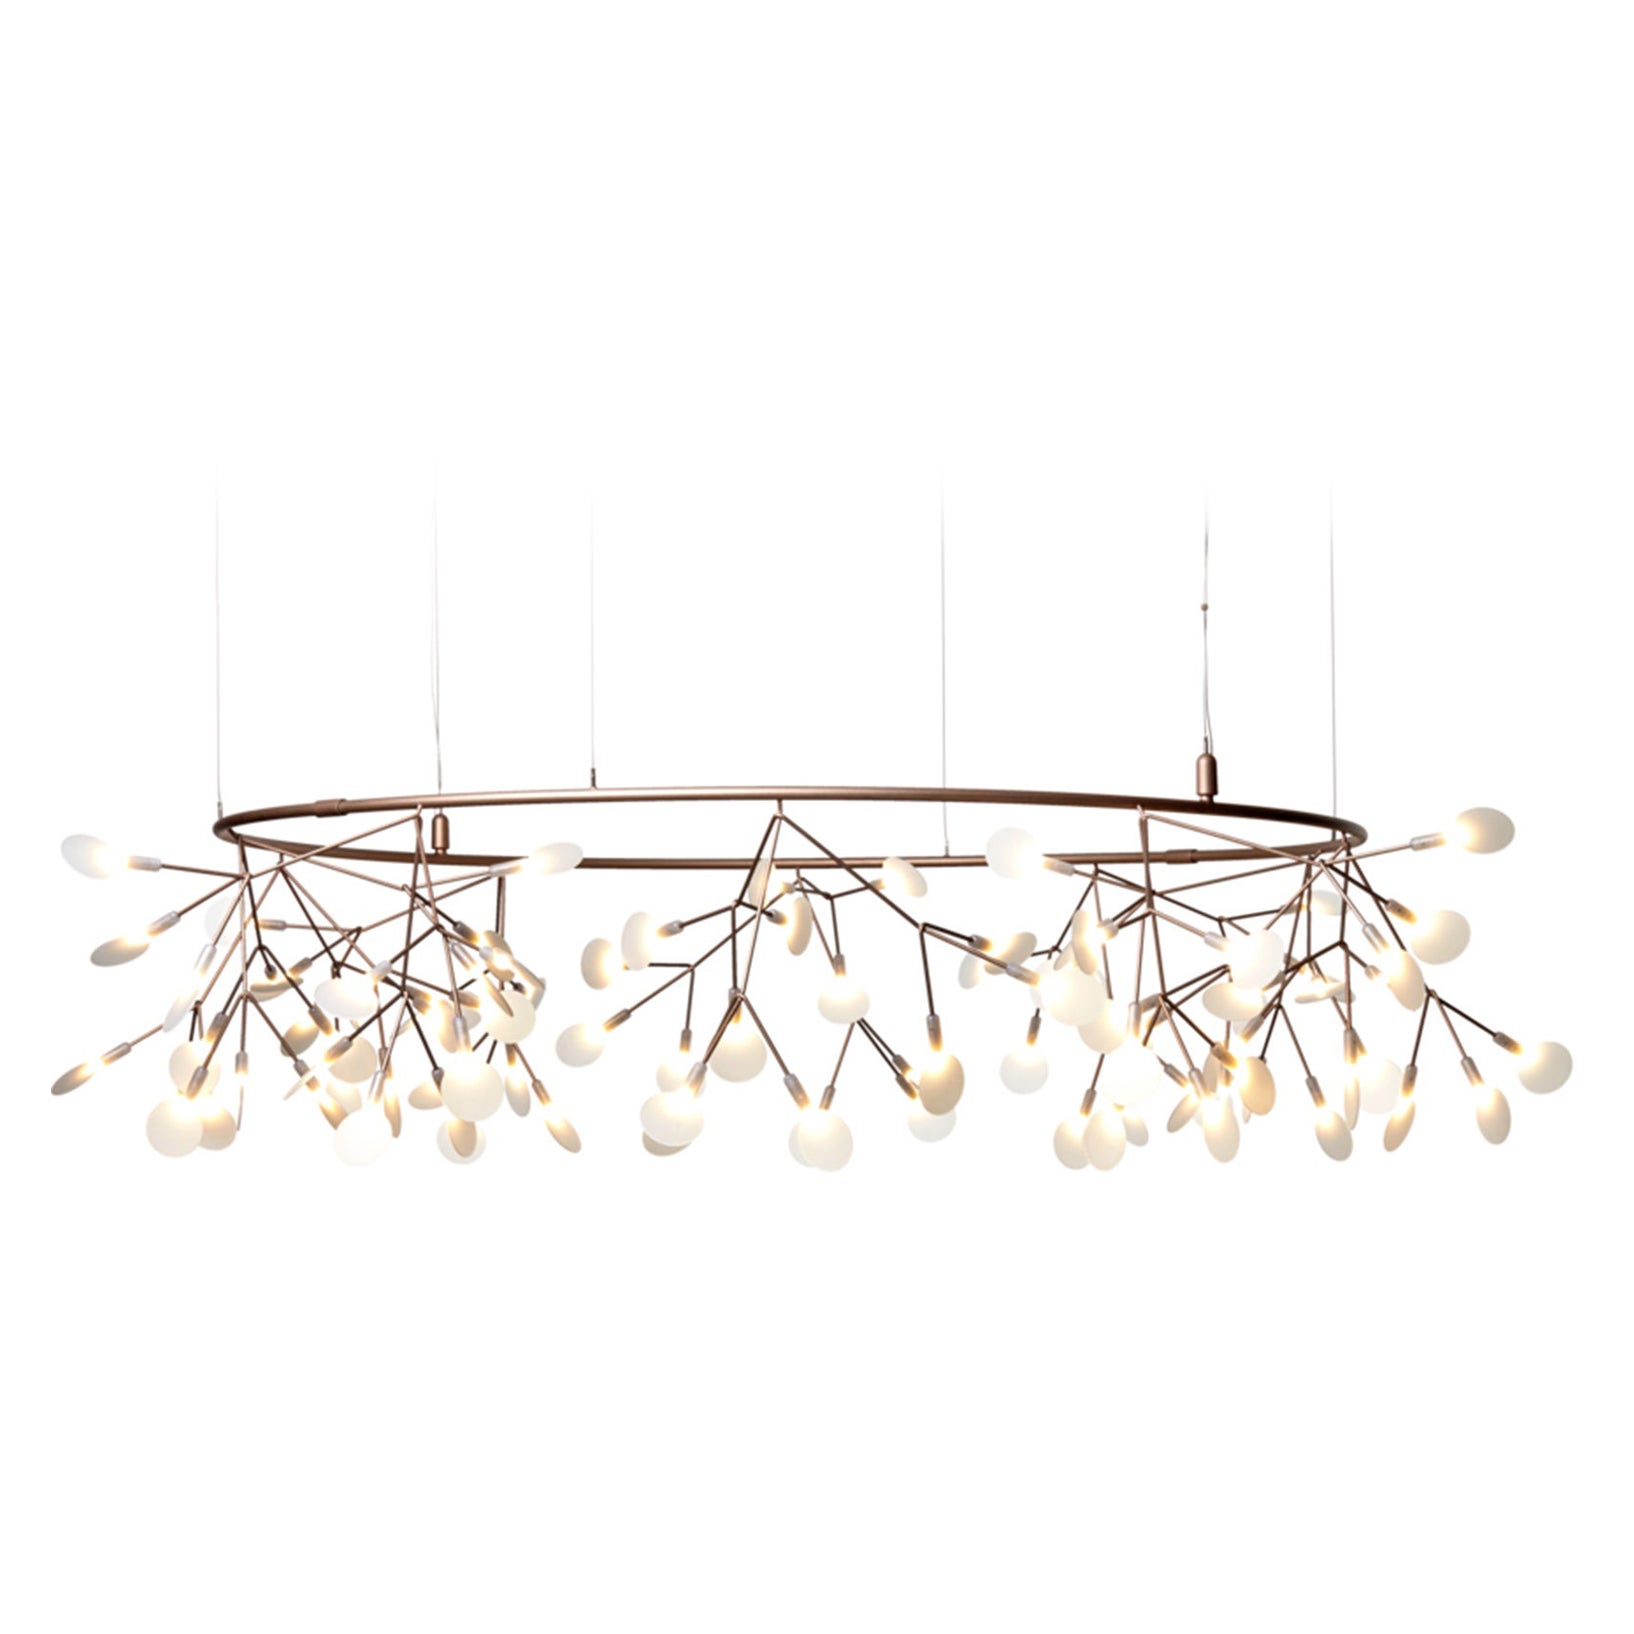 Moooi Heracleum The Big O Small Suspension Lamp in Copper by Bertjan Pot, 10m  For Sale